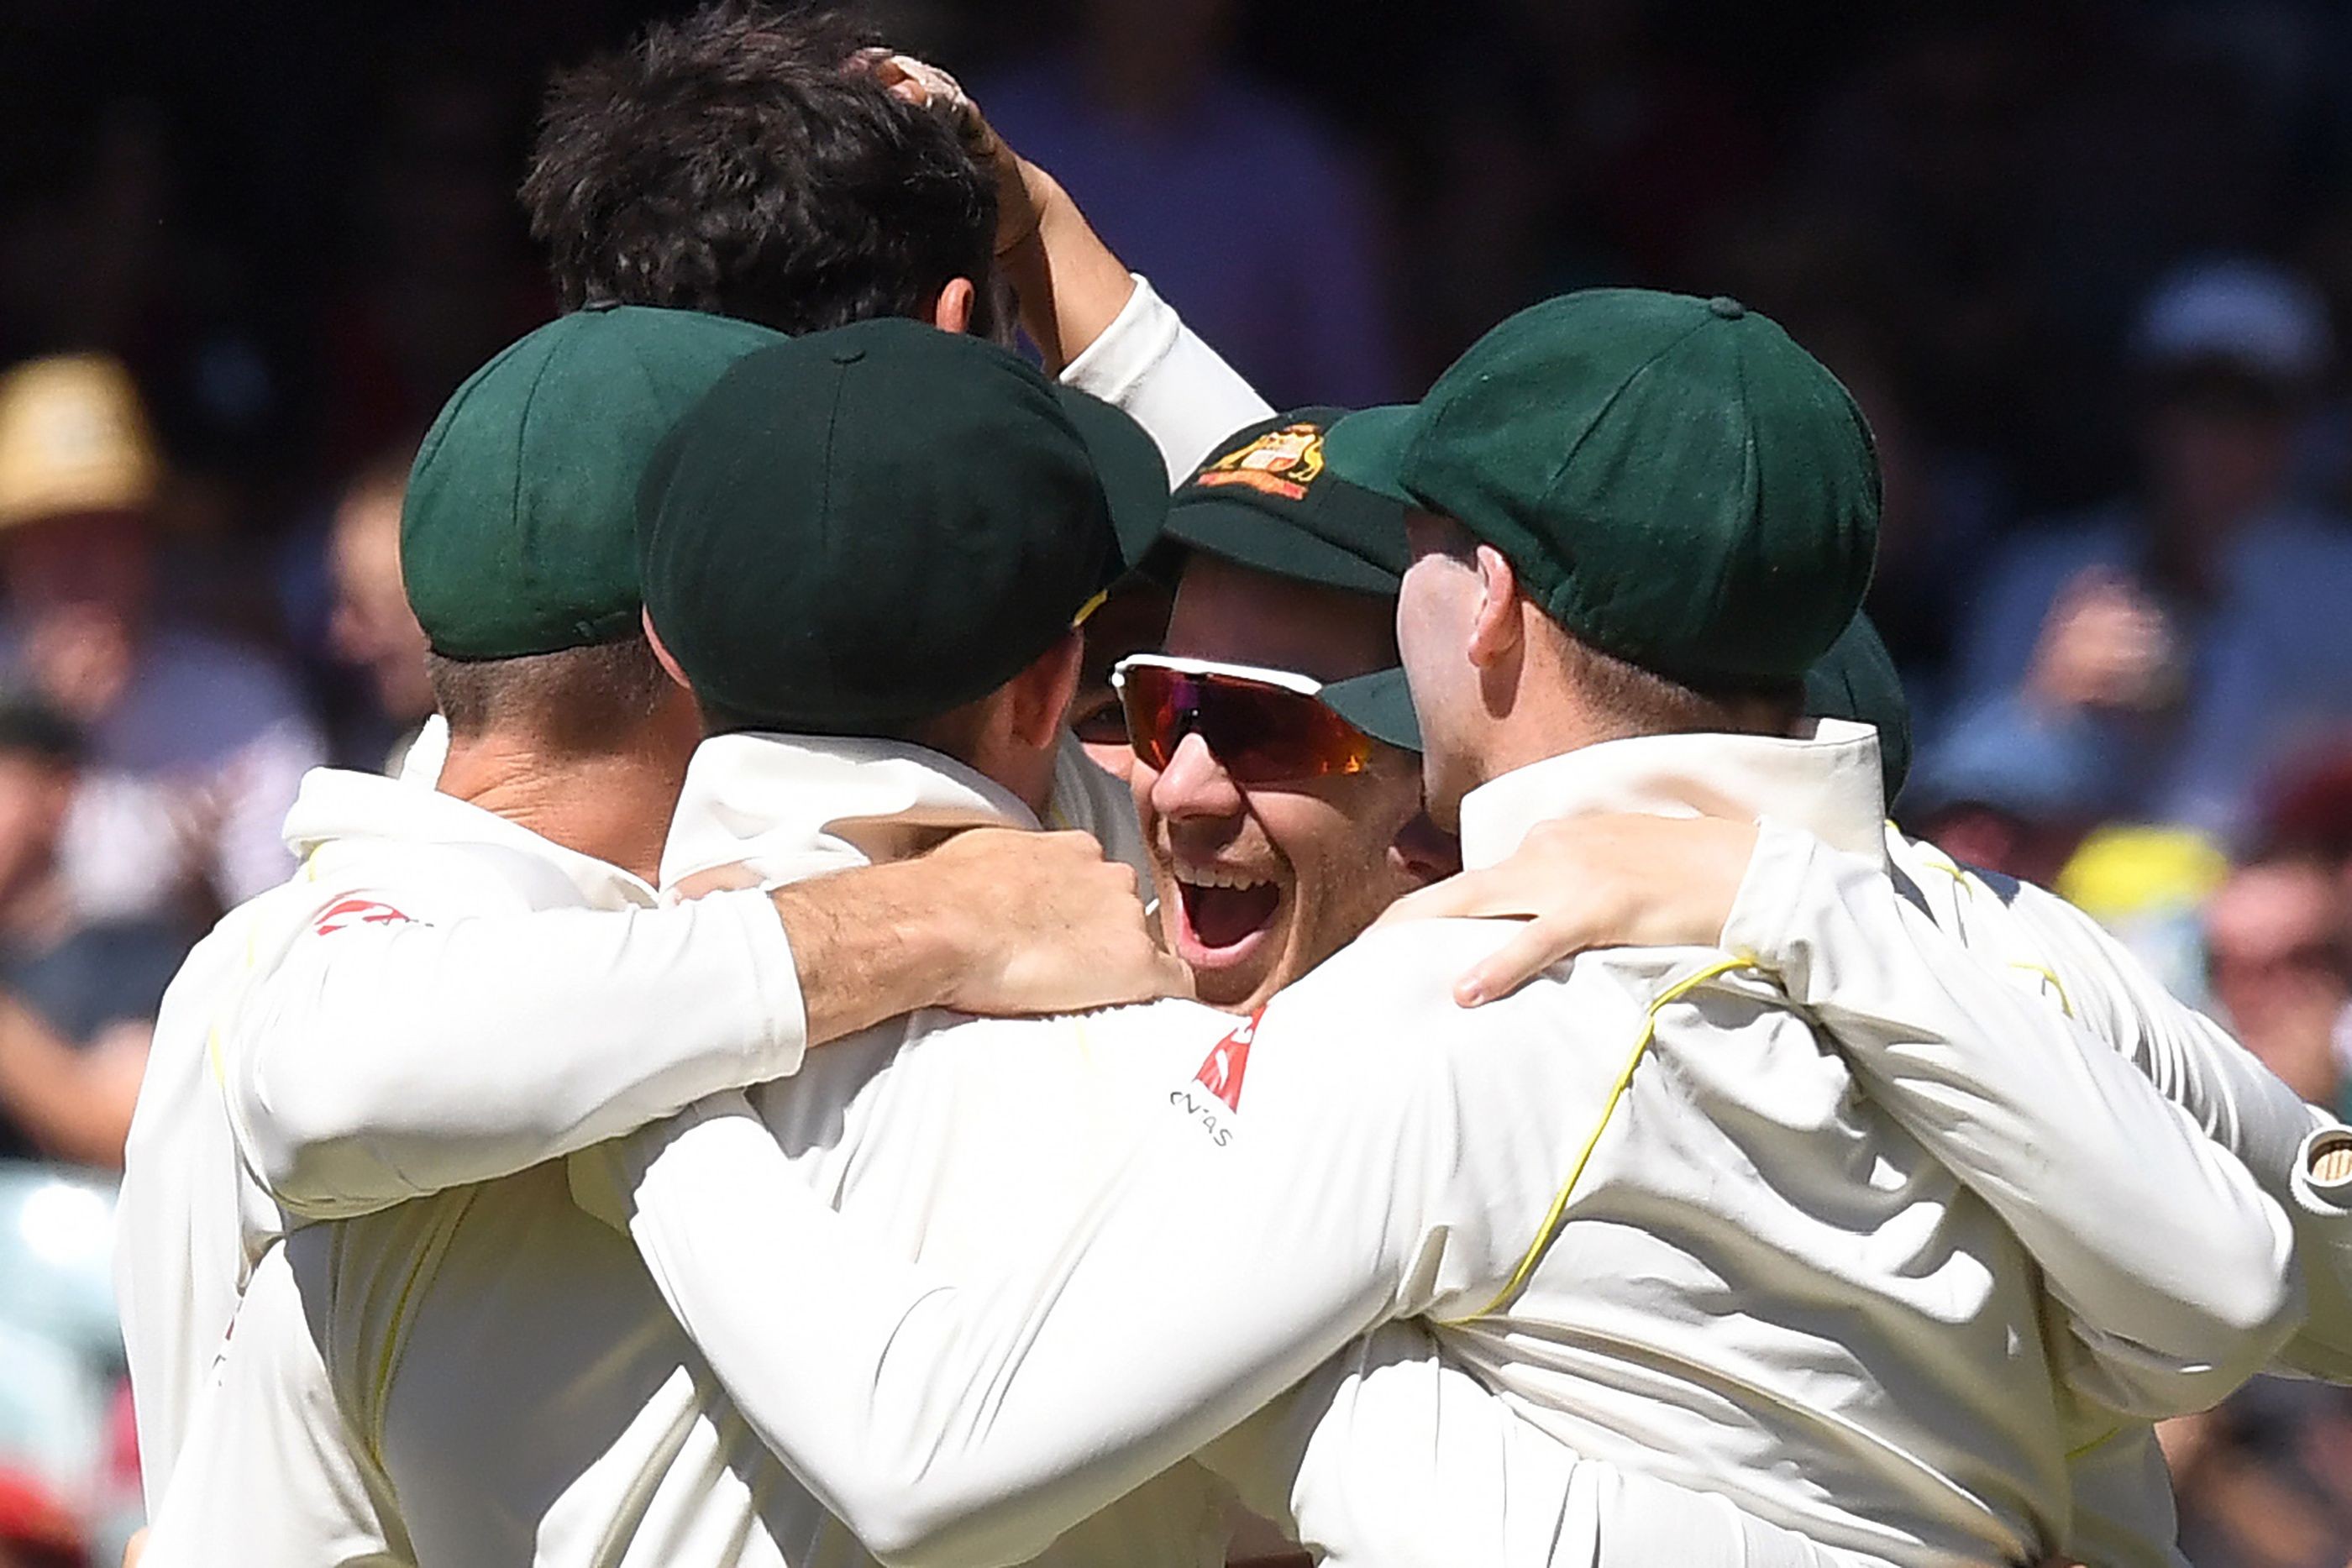 Australia’s players celebrating after they defeated England on the final day of the second Ashes test in Adelaide. Photo: AFP